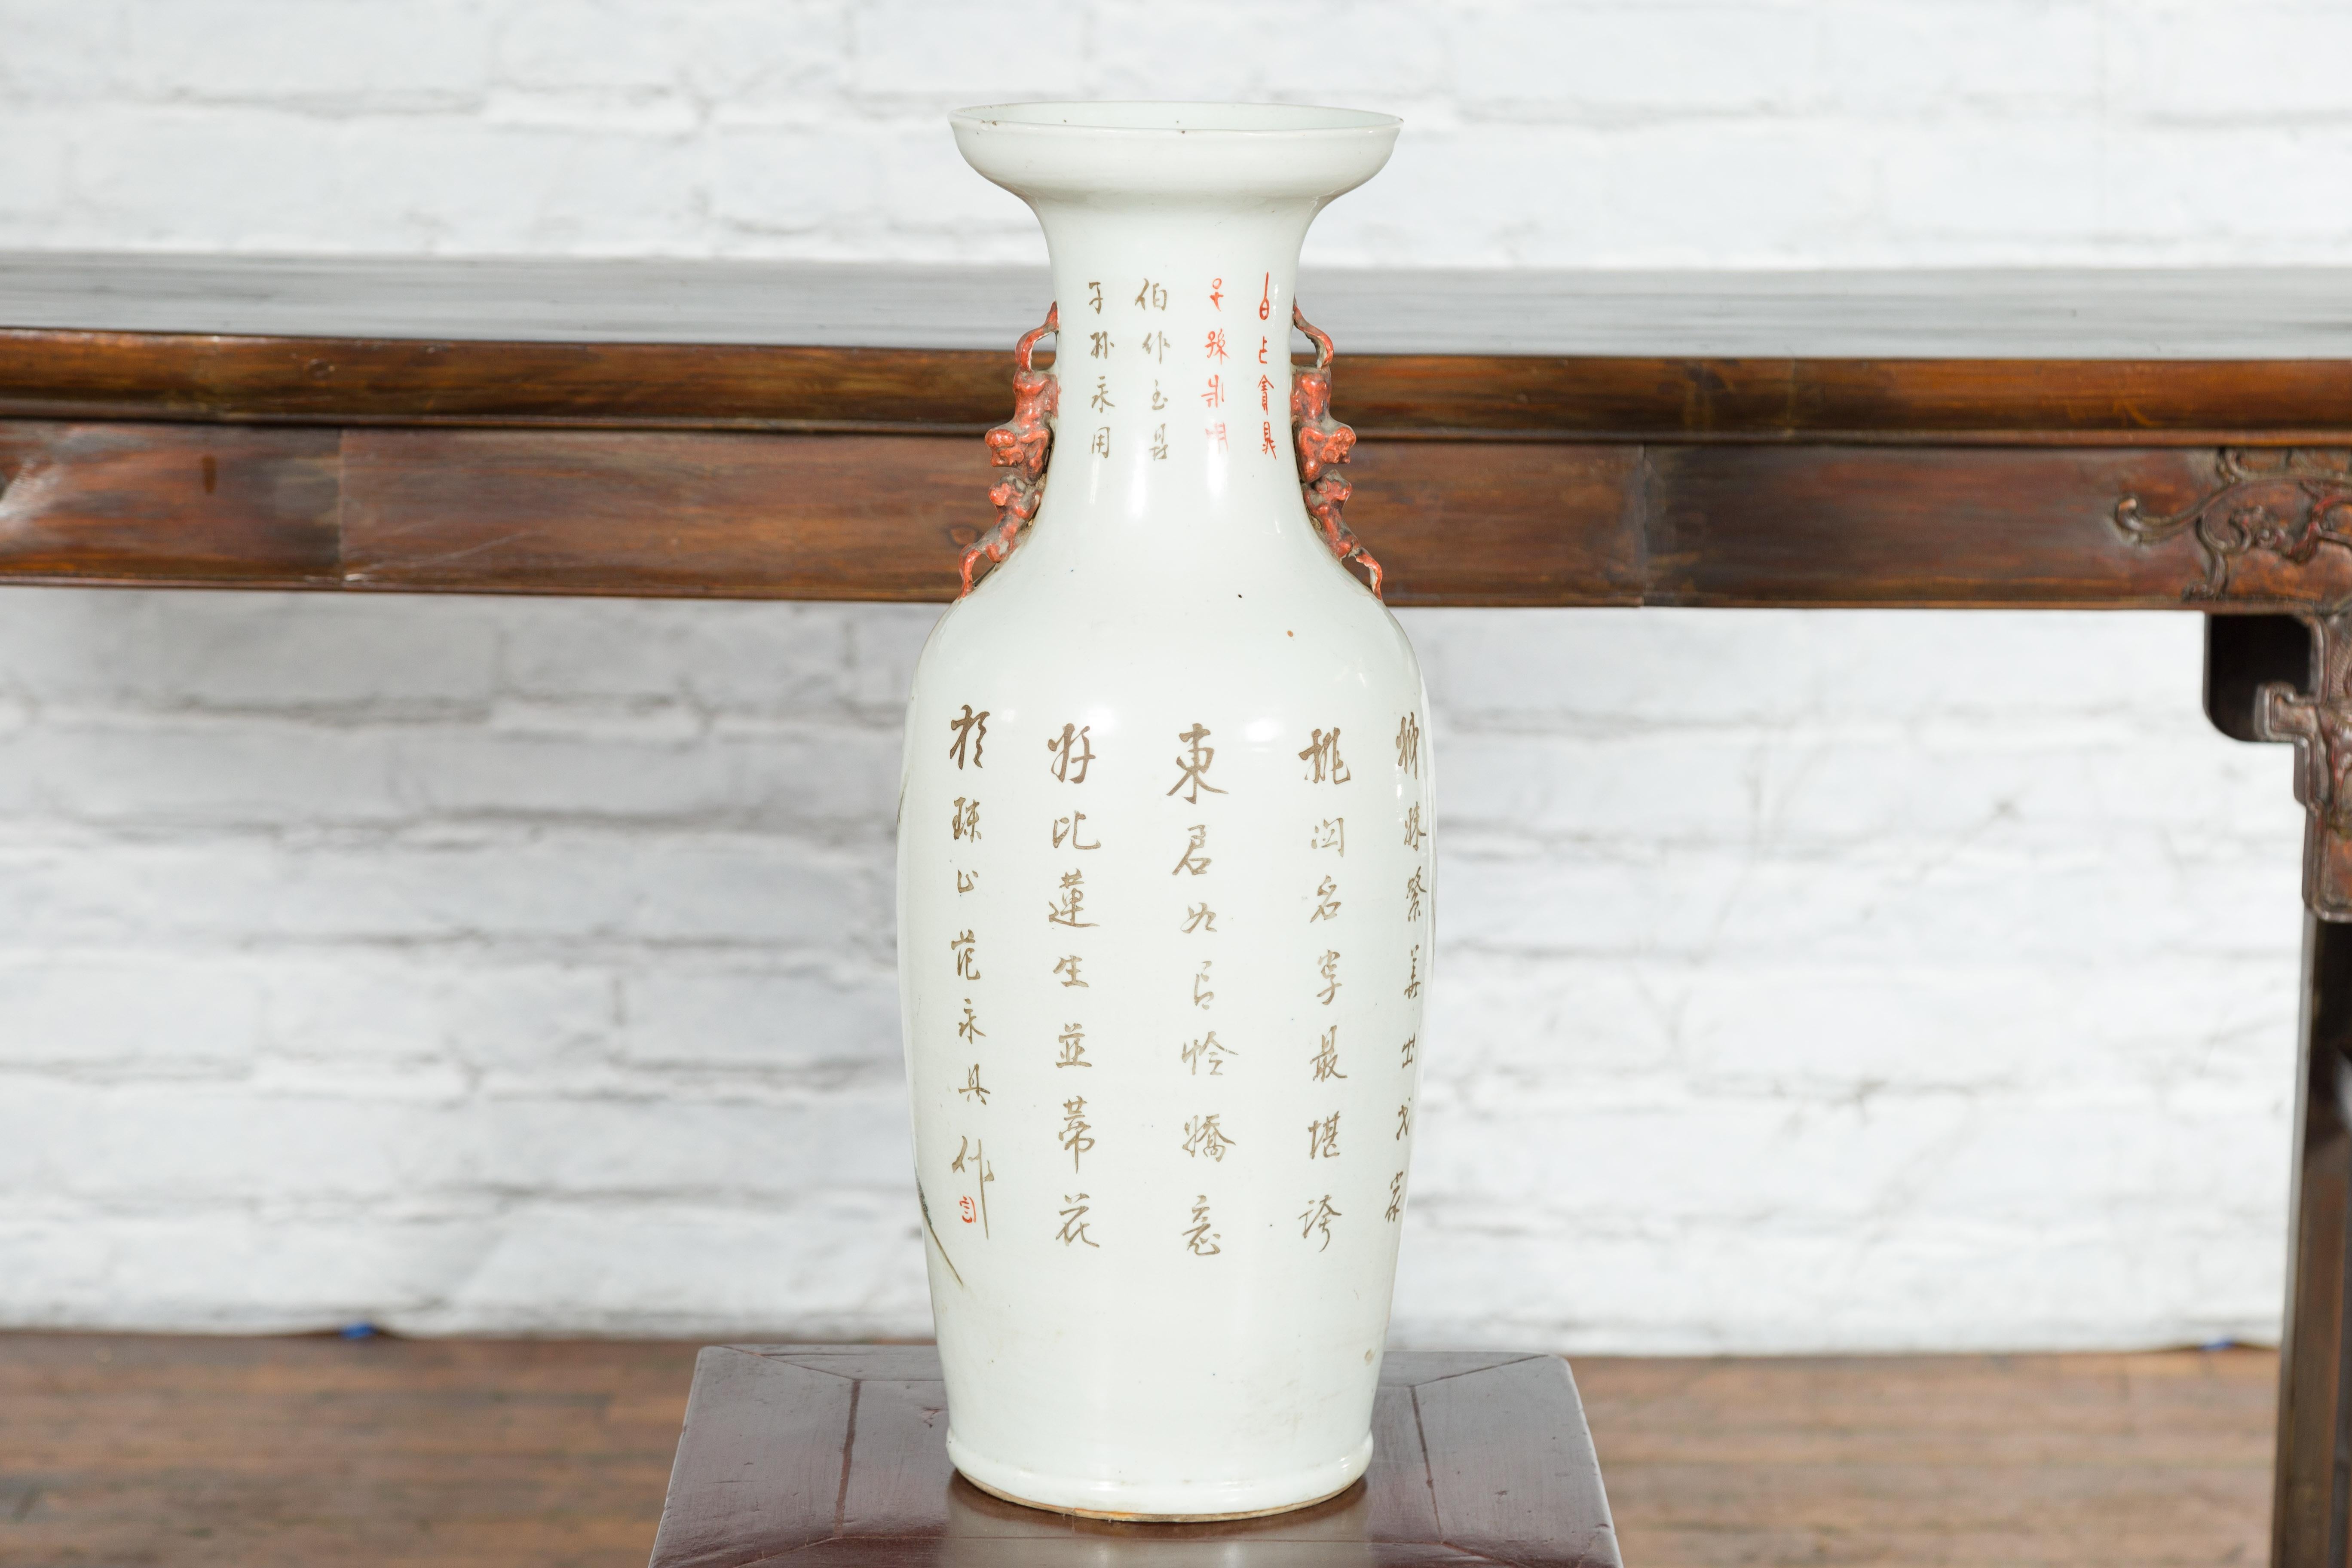 Chinese Qing Porcelain Vase with Hand-Painted Figures and Calligraphy Motifs For Sale 7